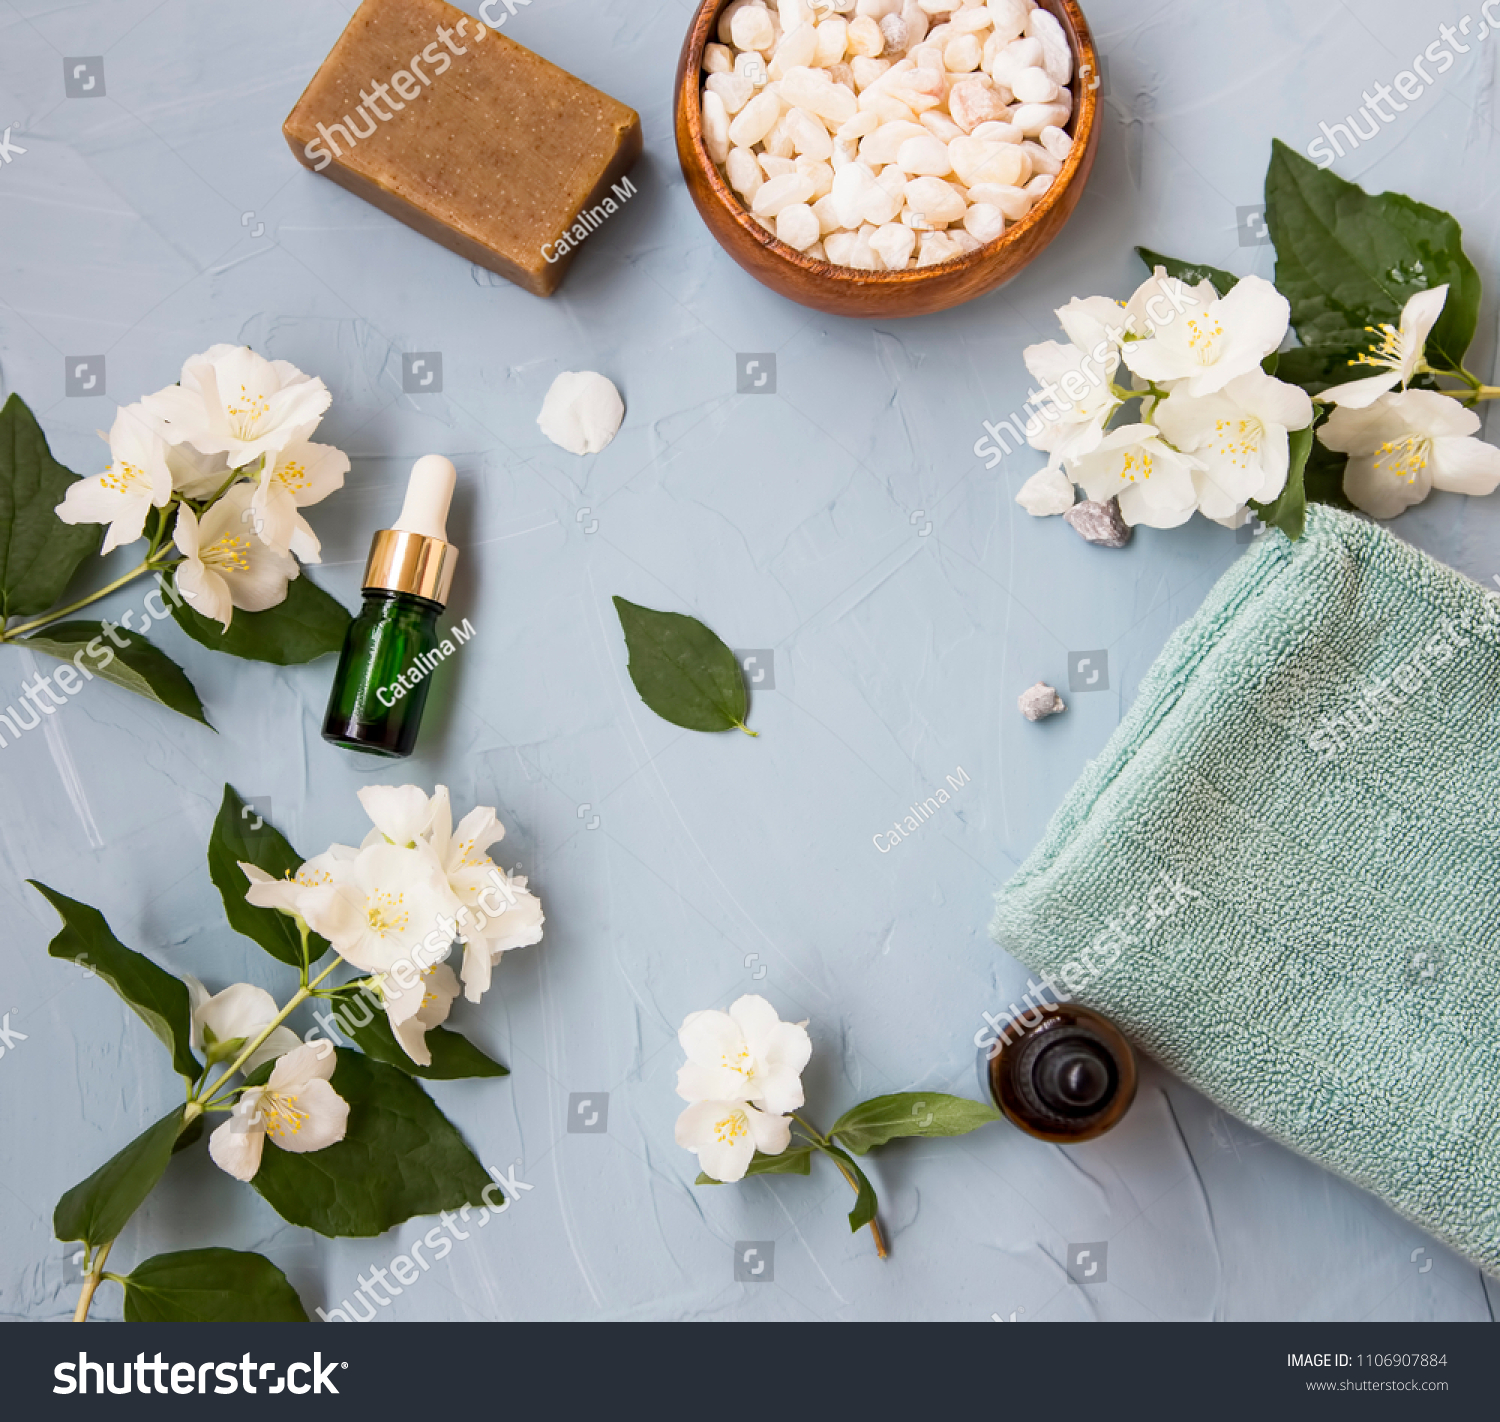 Spa setting flatlay with bath salt, jasmine oil bottle and flowers, towel and natural soap. Spa and wellness still life #1106907884